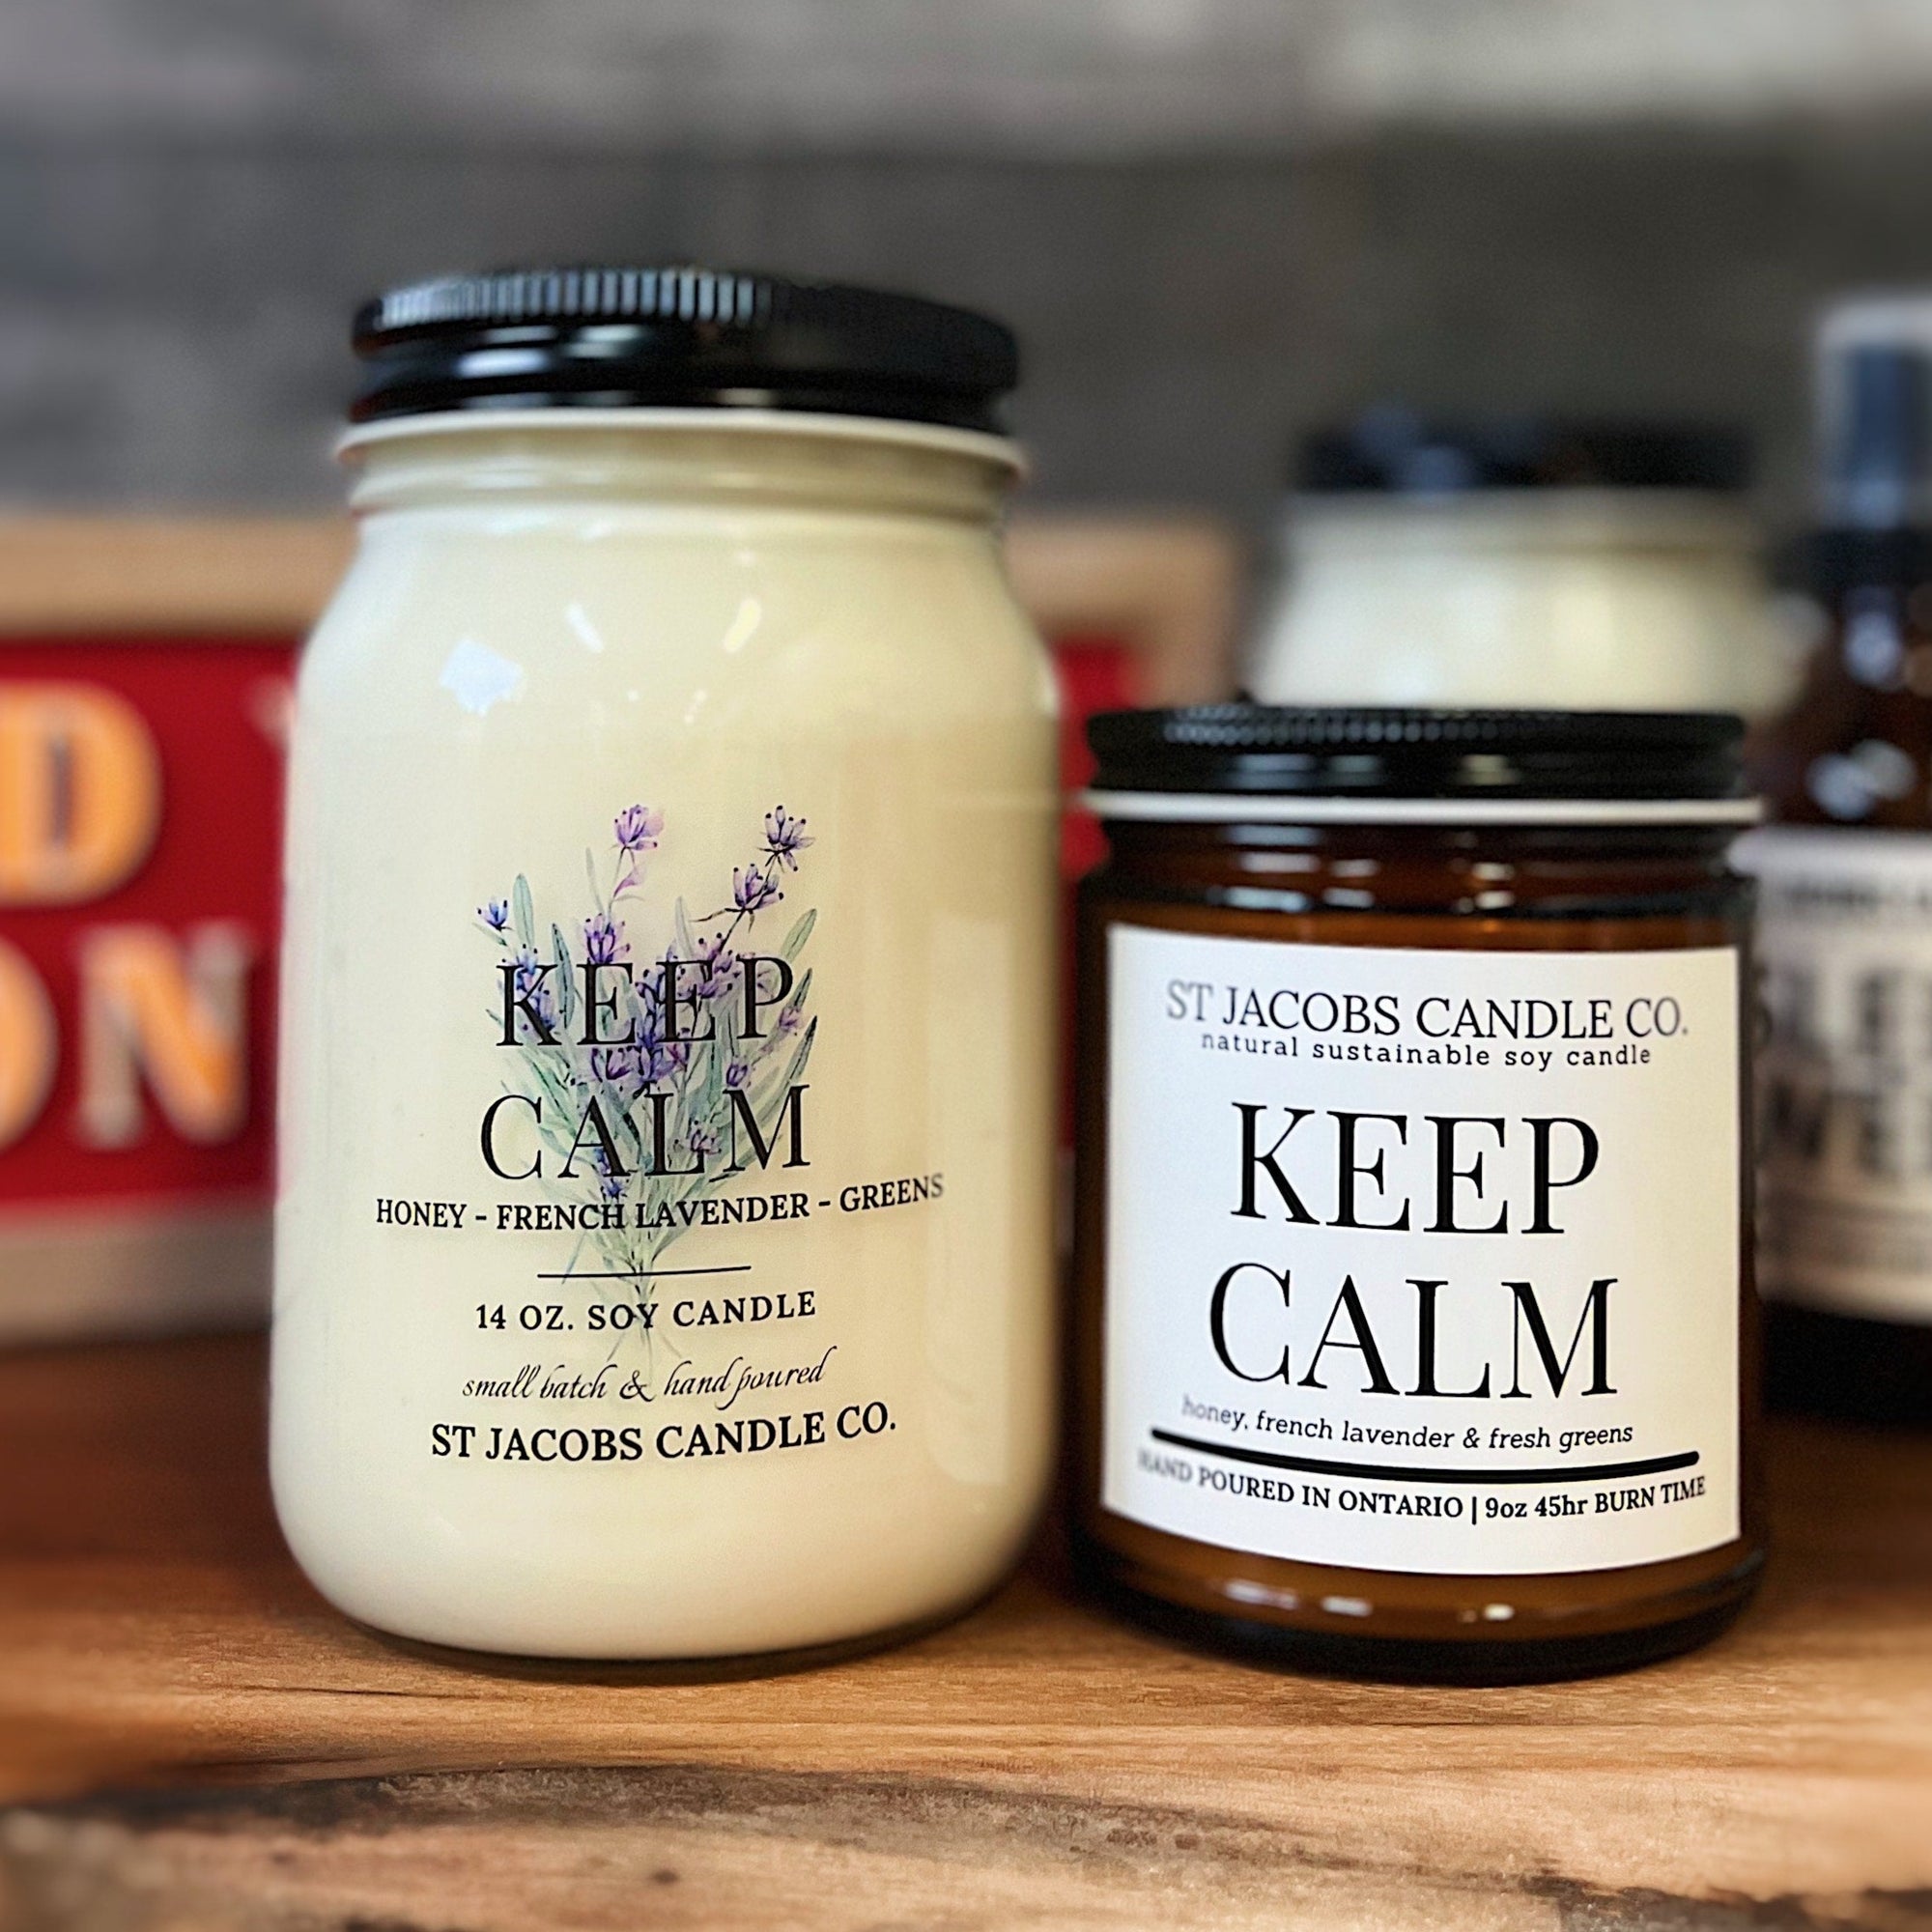 "KEEP CALM" Natural Soy Candle